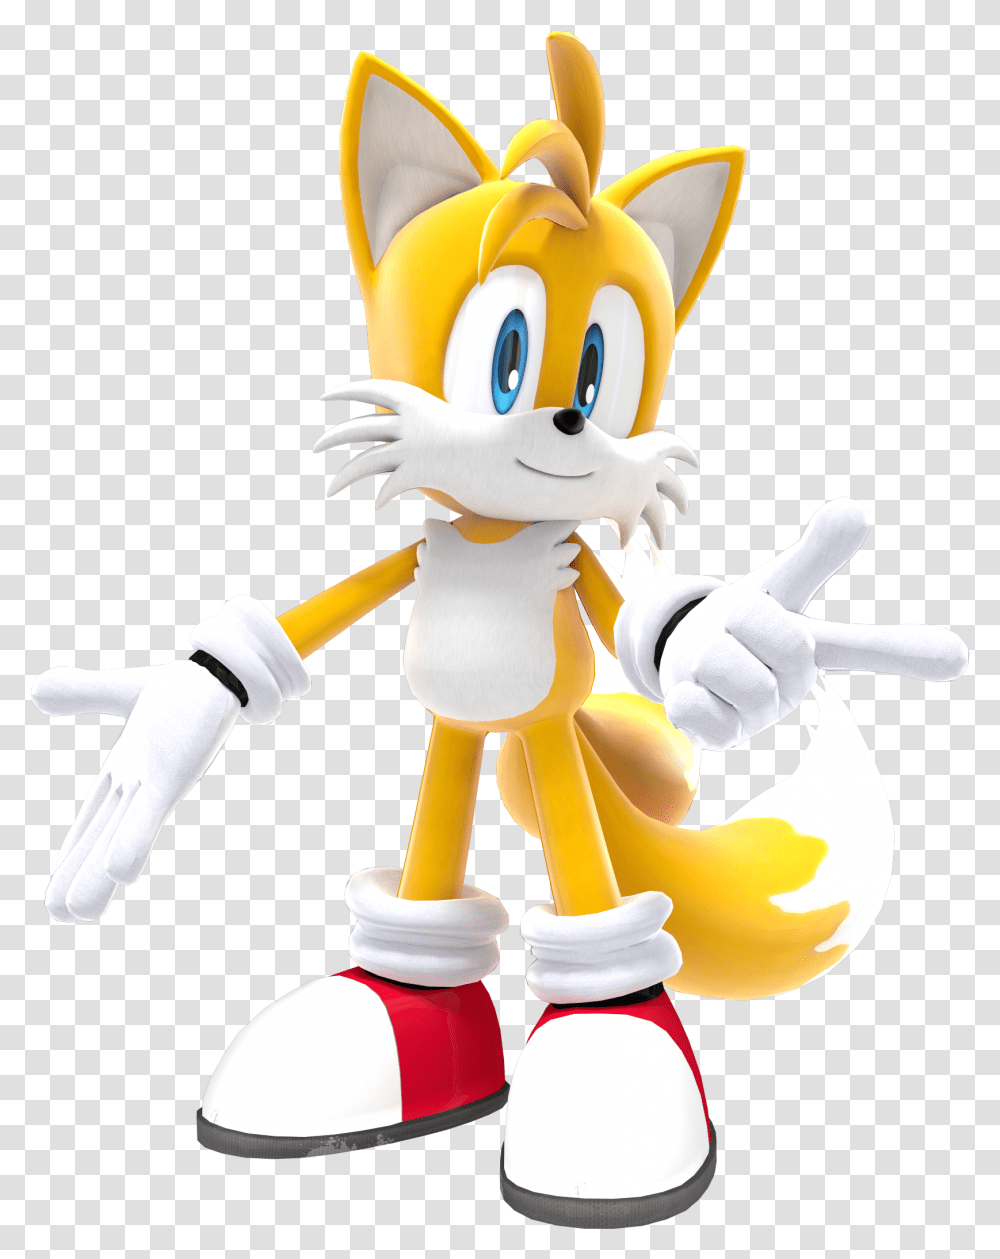 Tails The Fox 3d, Toy, Figurine, Sweets, Food Transparent Png